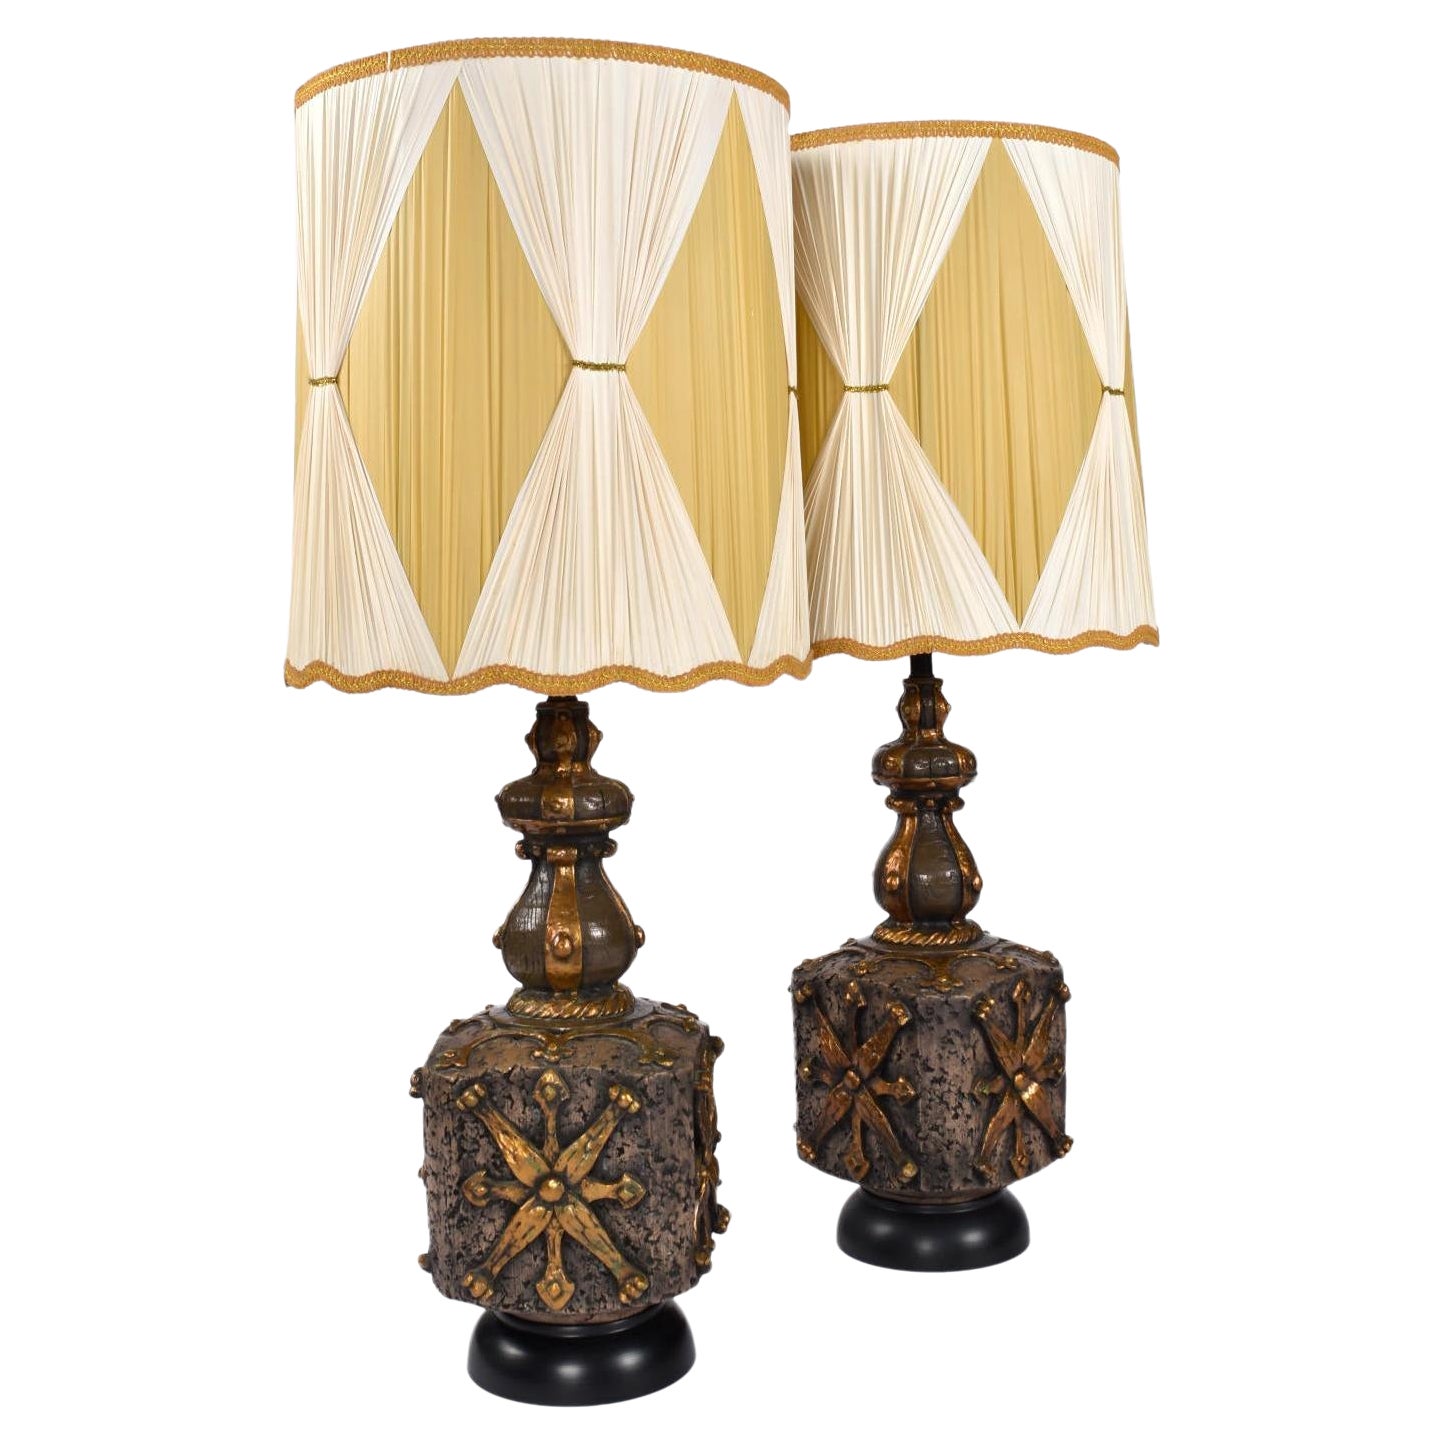 Pair of Large Brown Gold and Black Brutalist Lamps with Pleated Shades